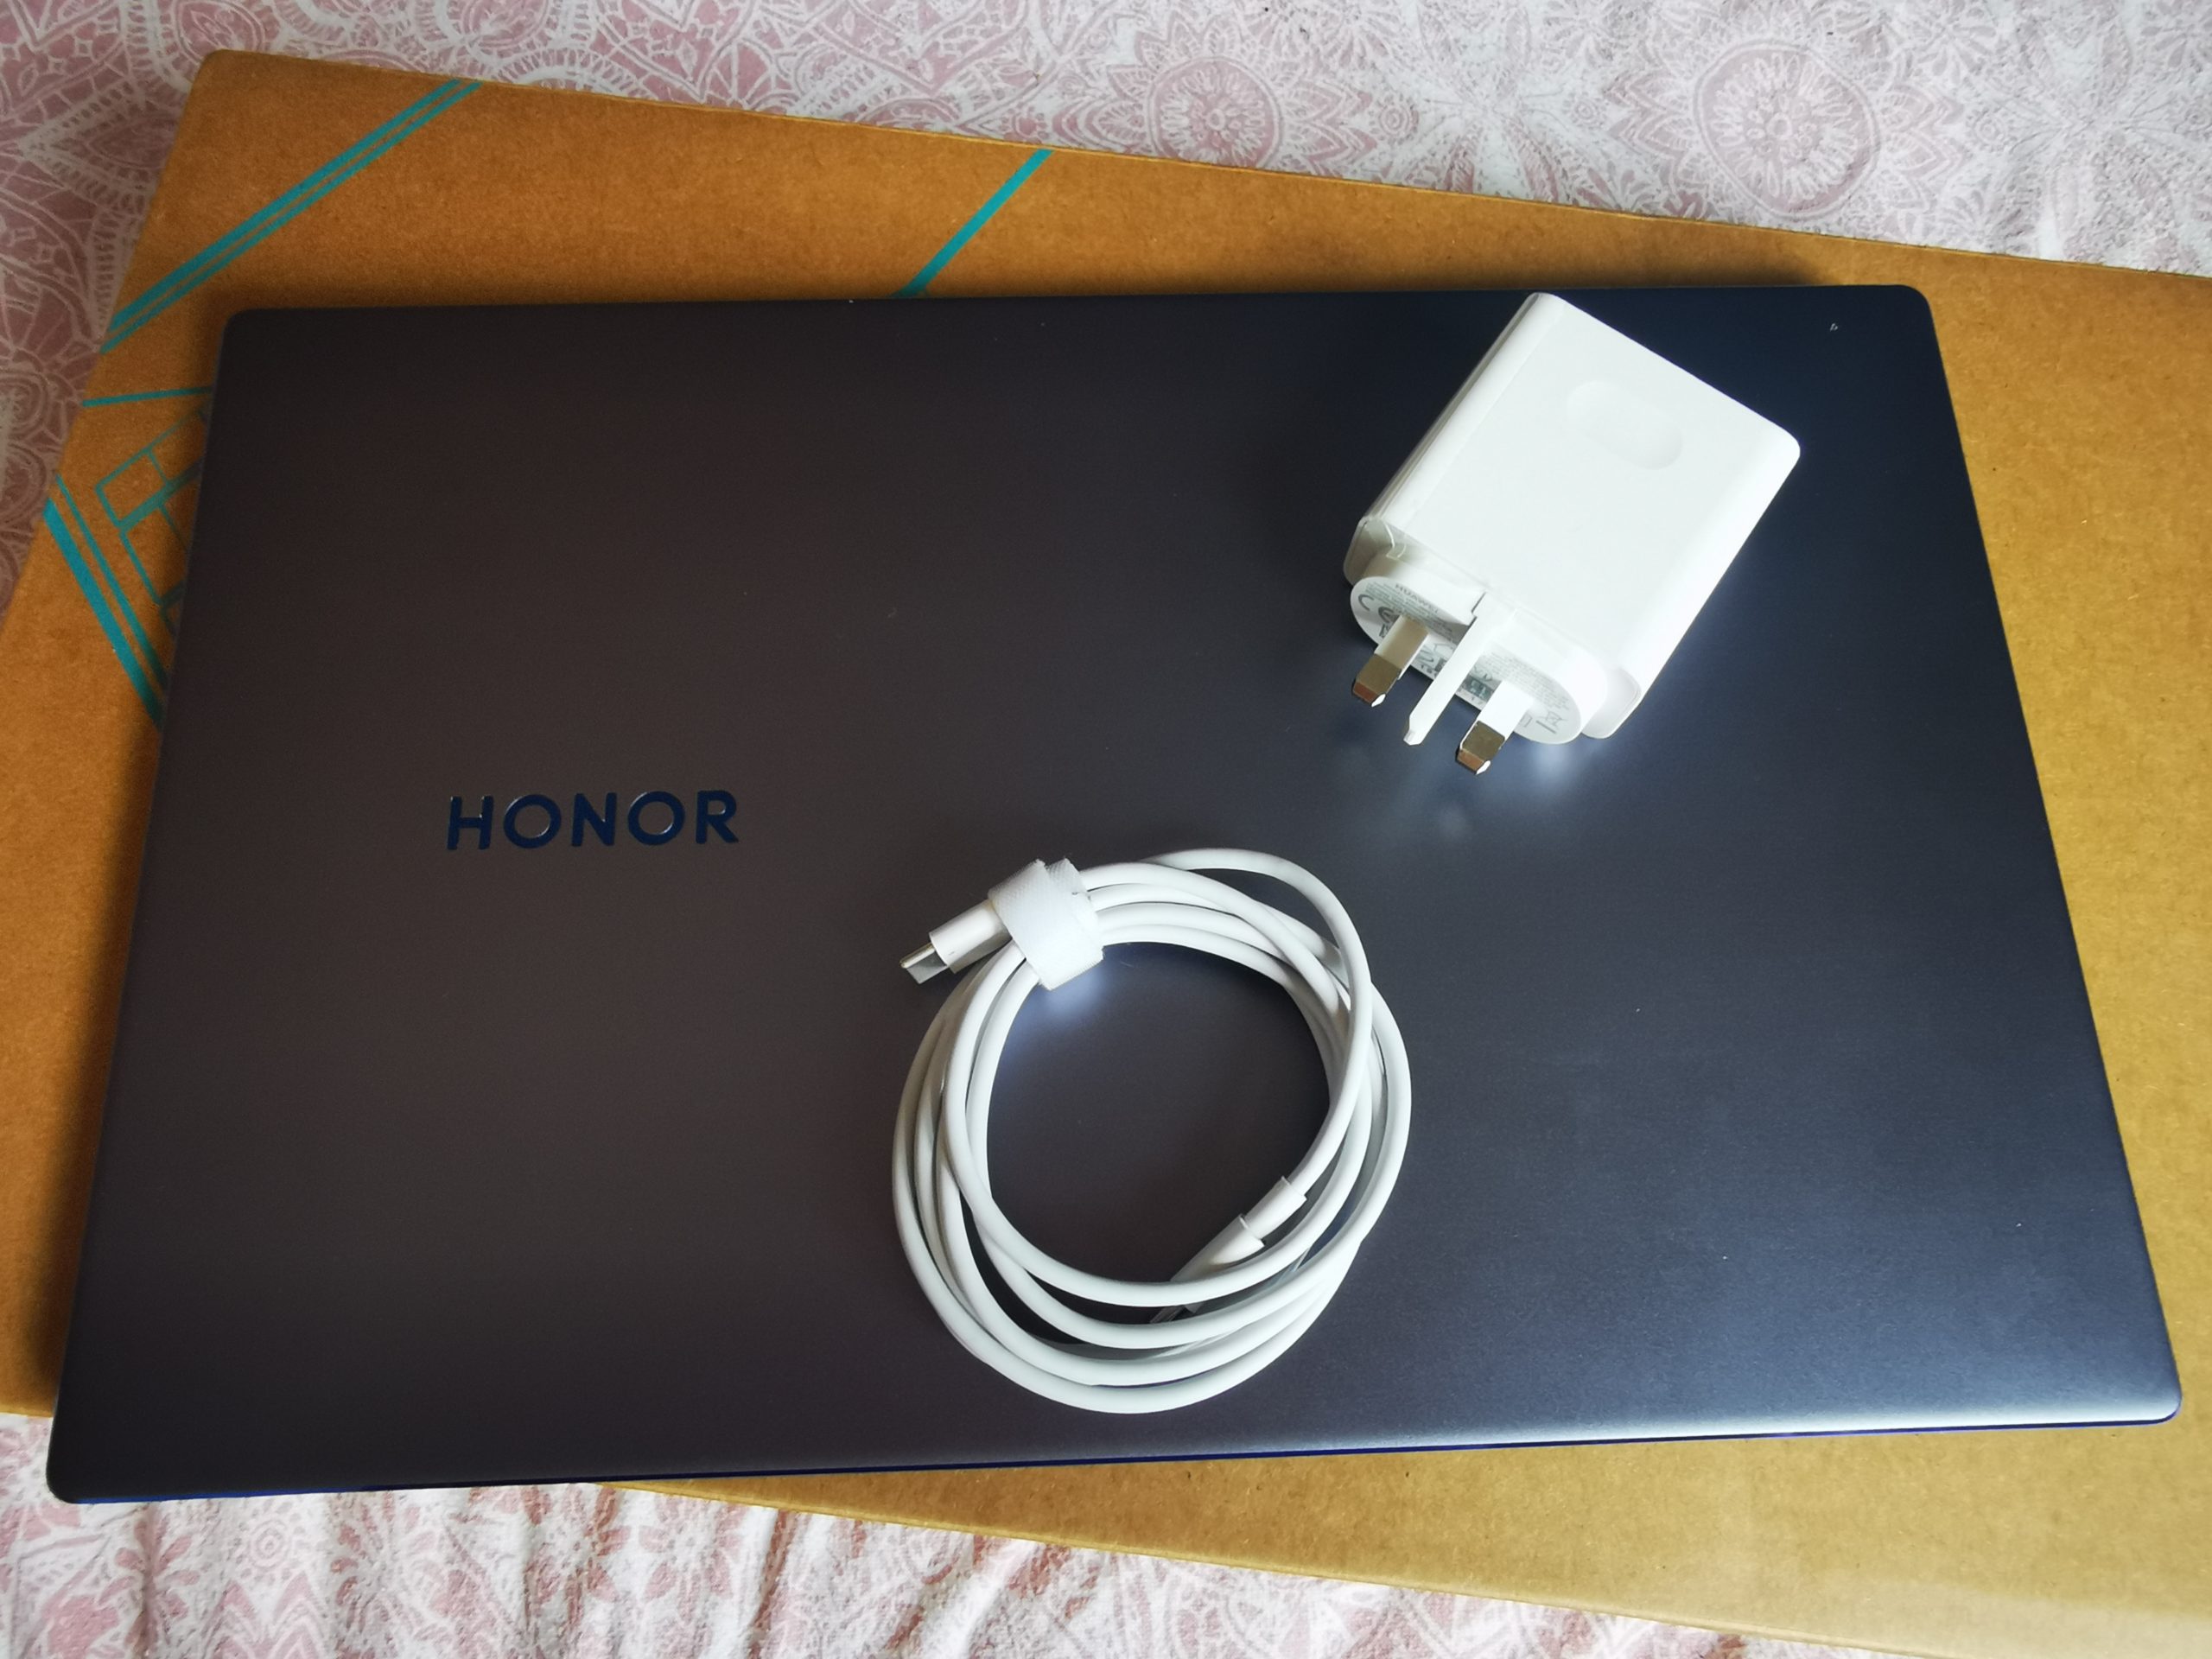 Review of the Honor MagicBook 15 power with AMD 4500U